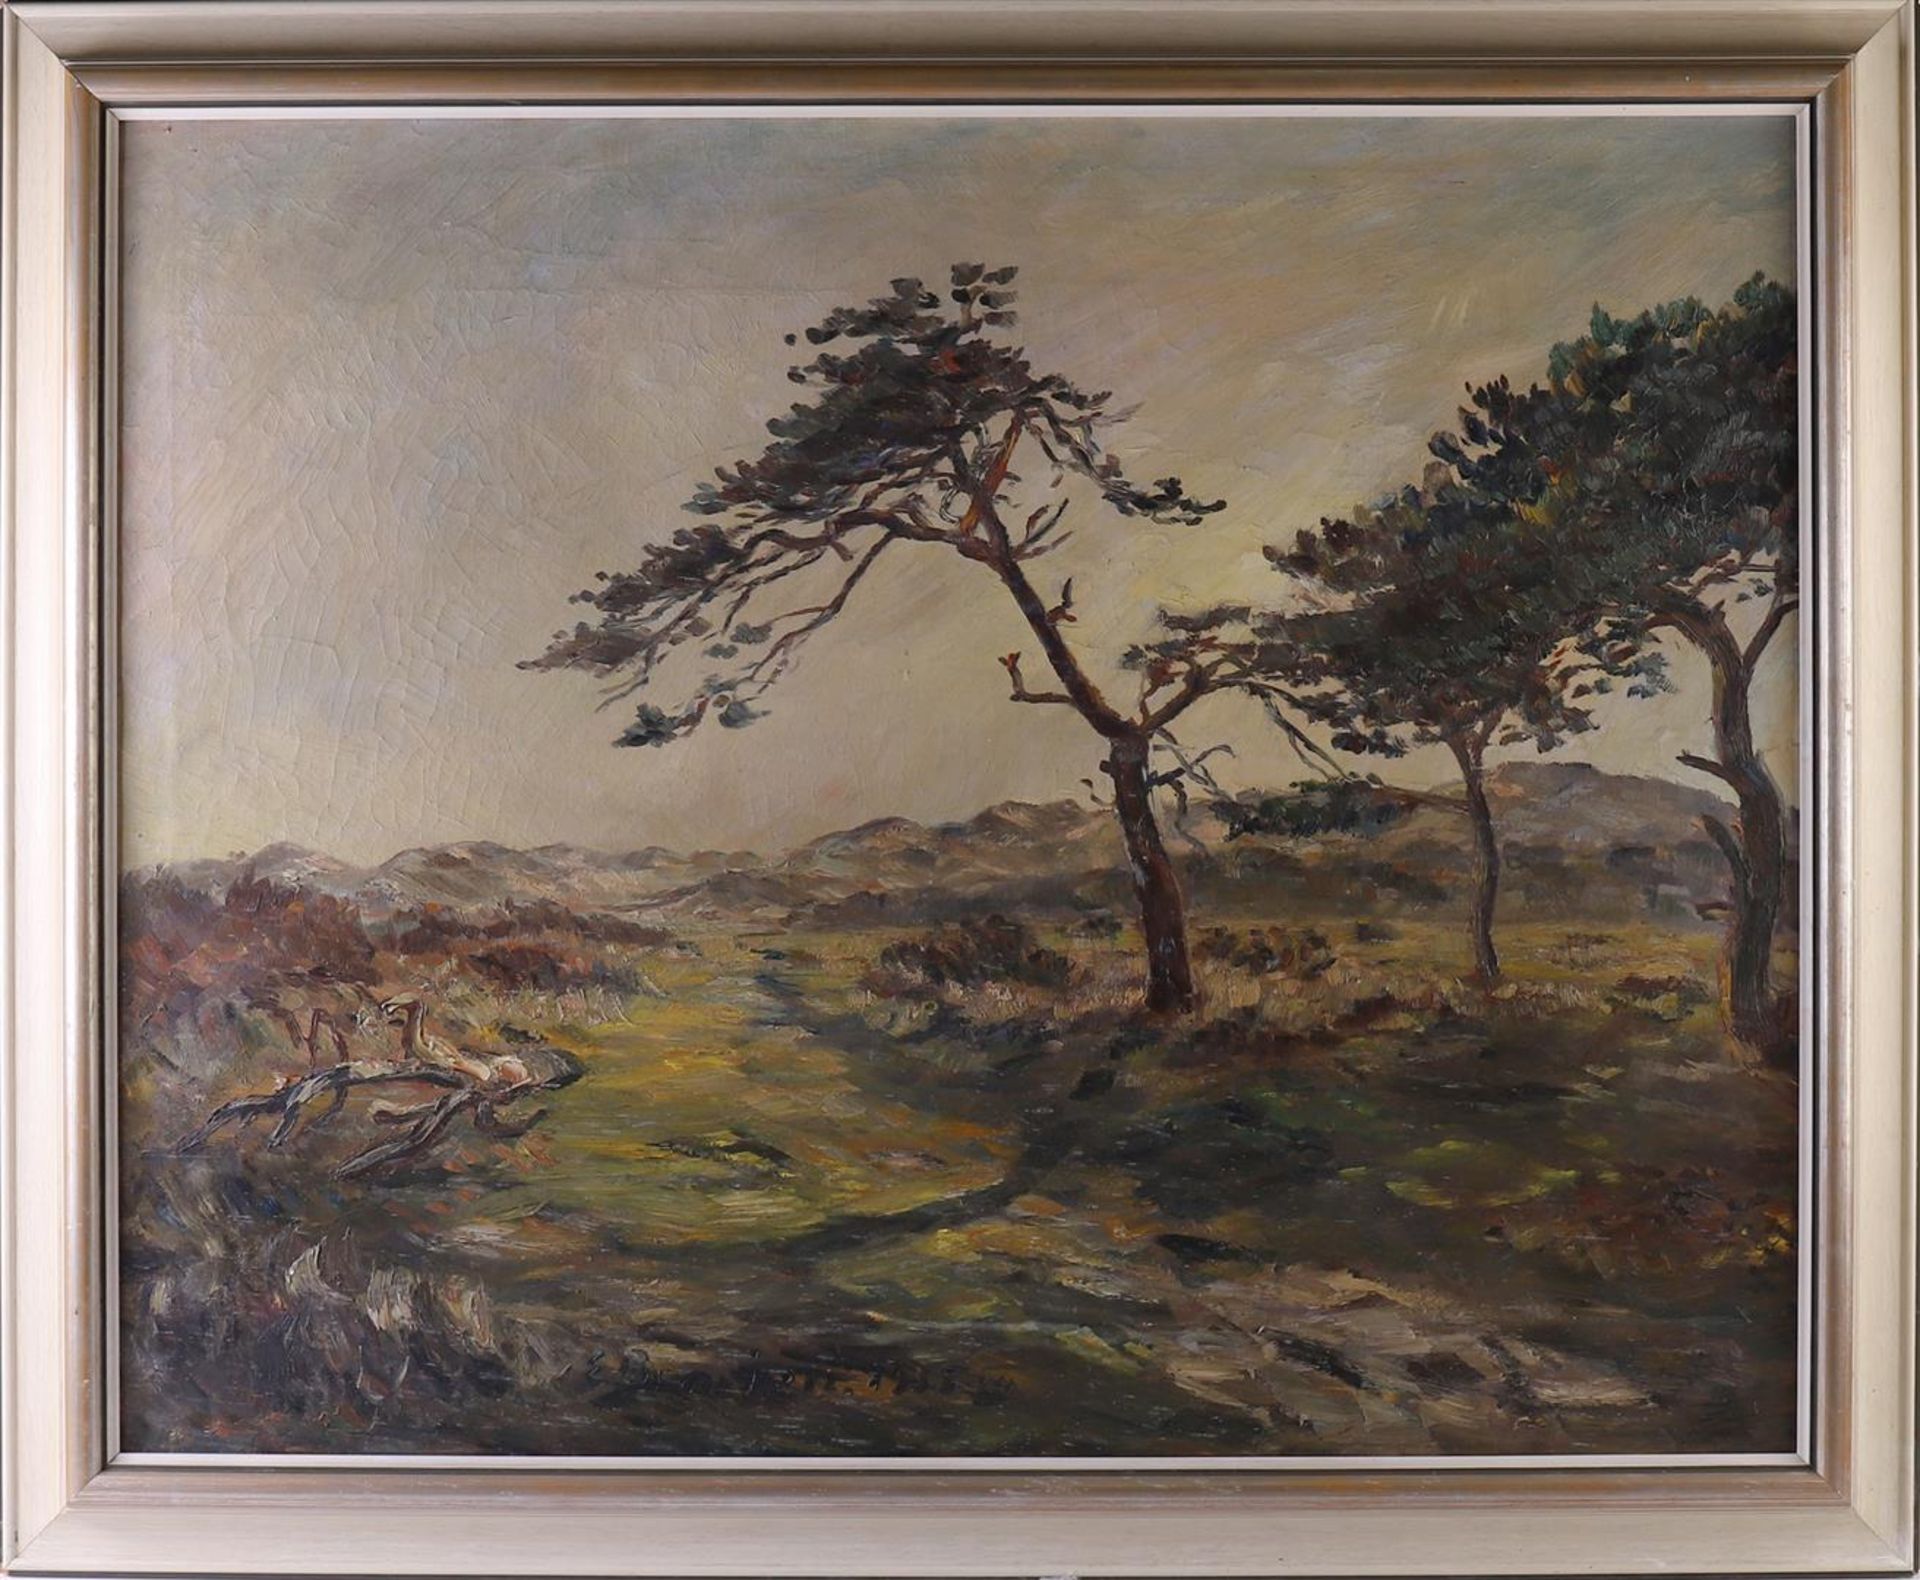 Bowien, Erwin Johannes (1899-1972) "Summer landscape", signed in full m.o and 1935, oil paint/